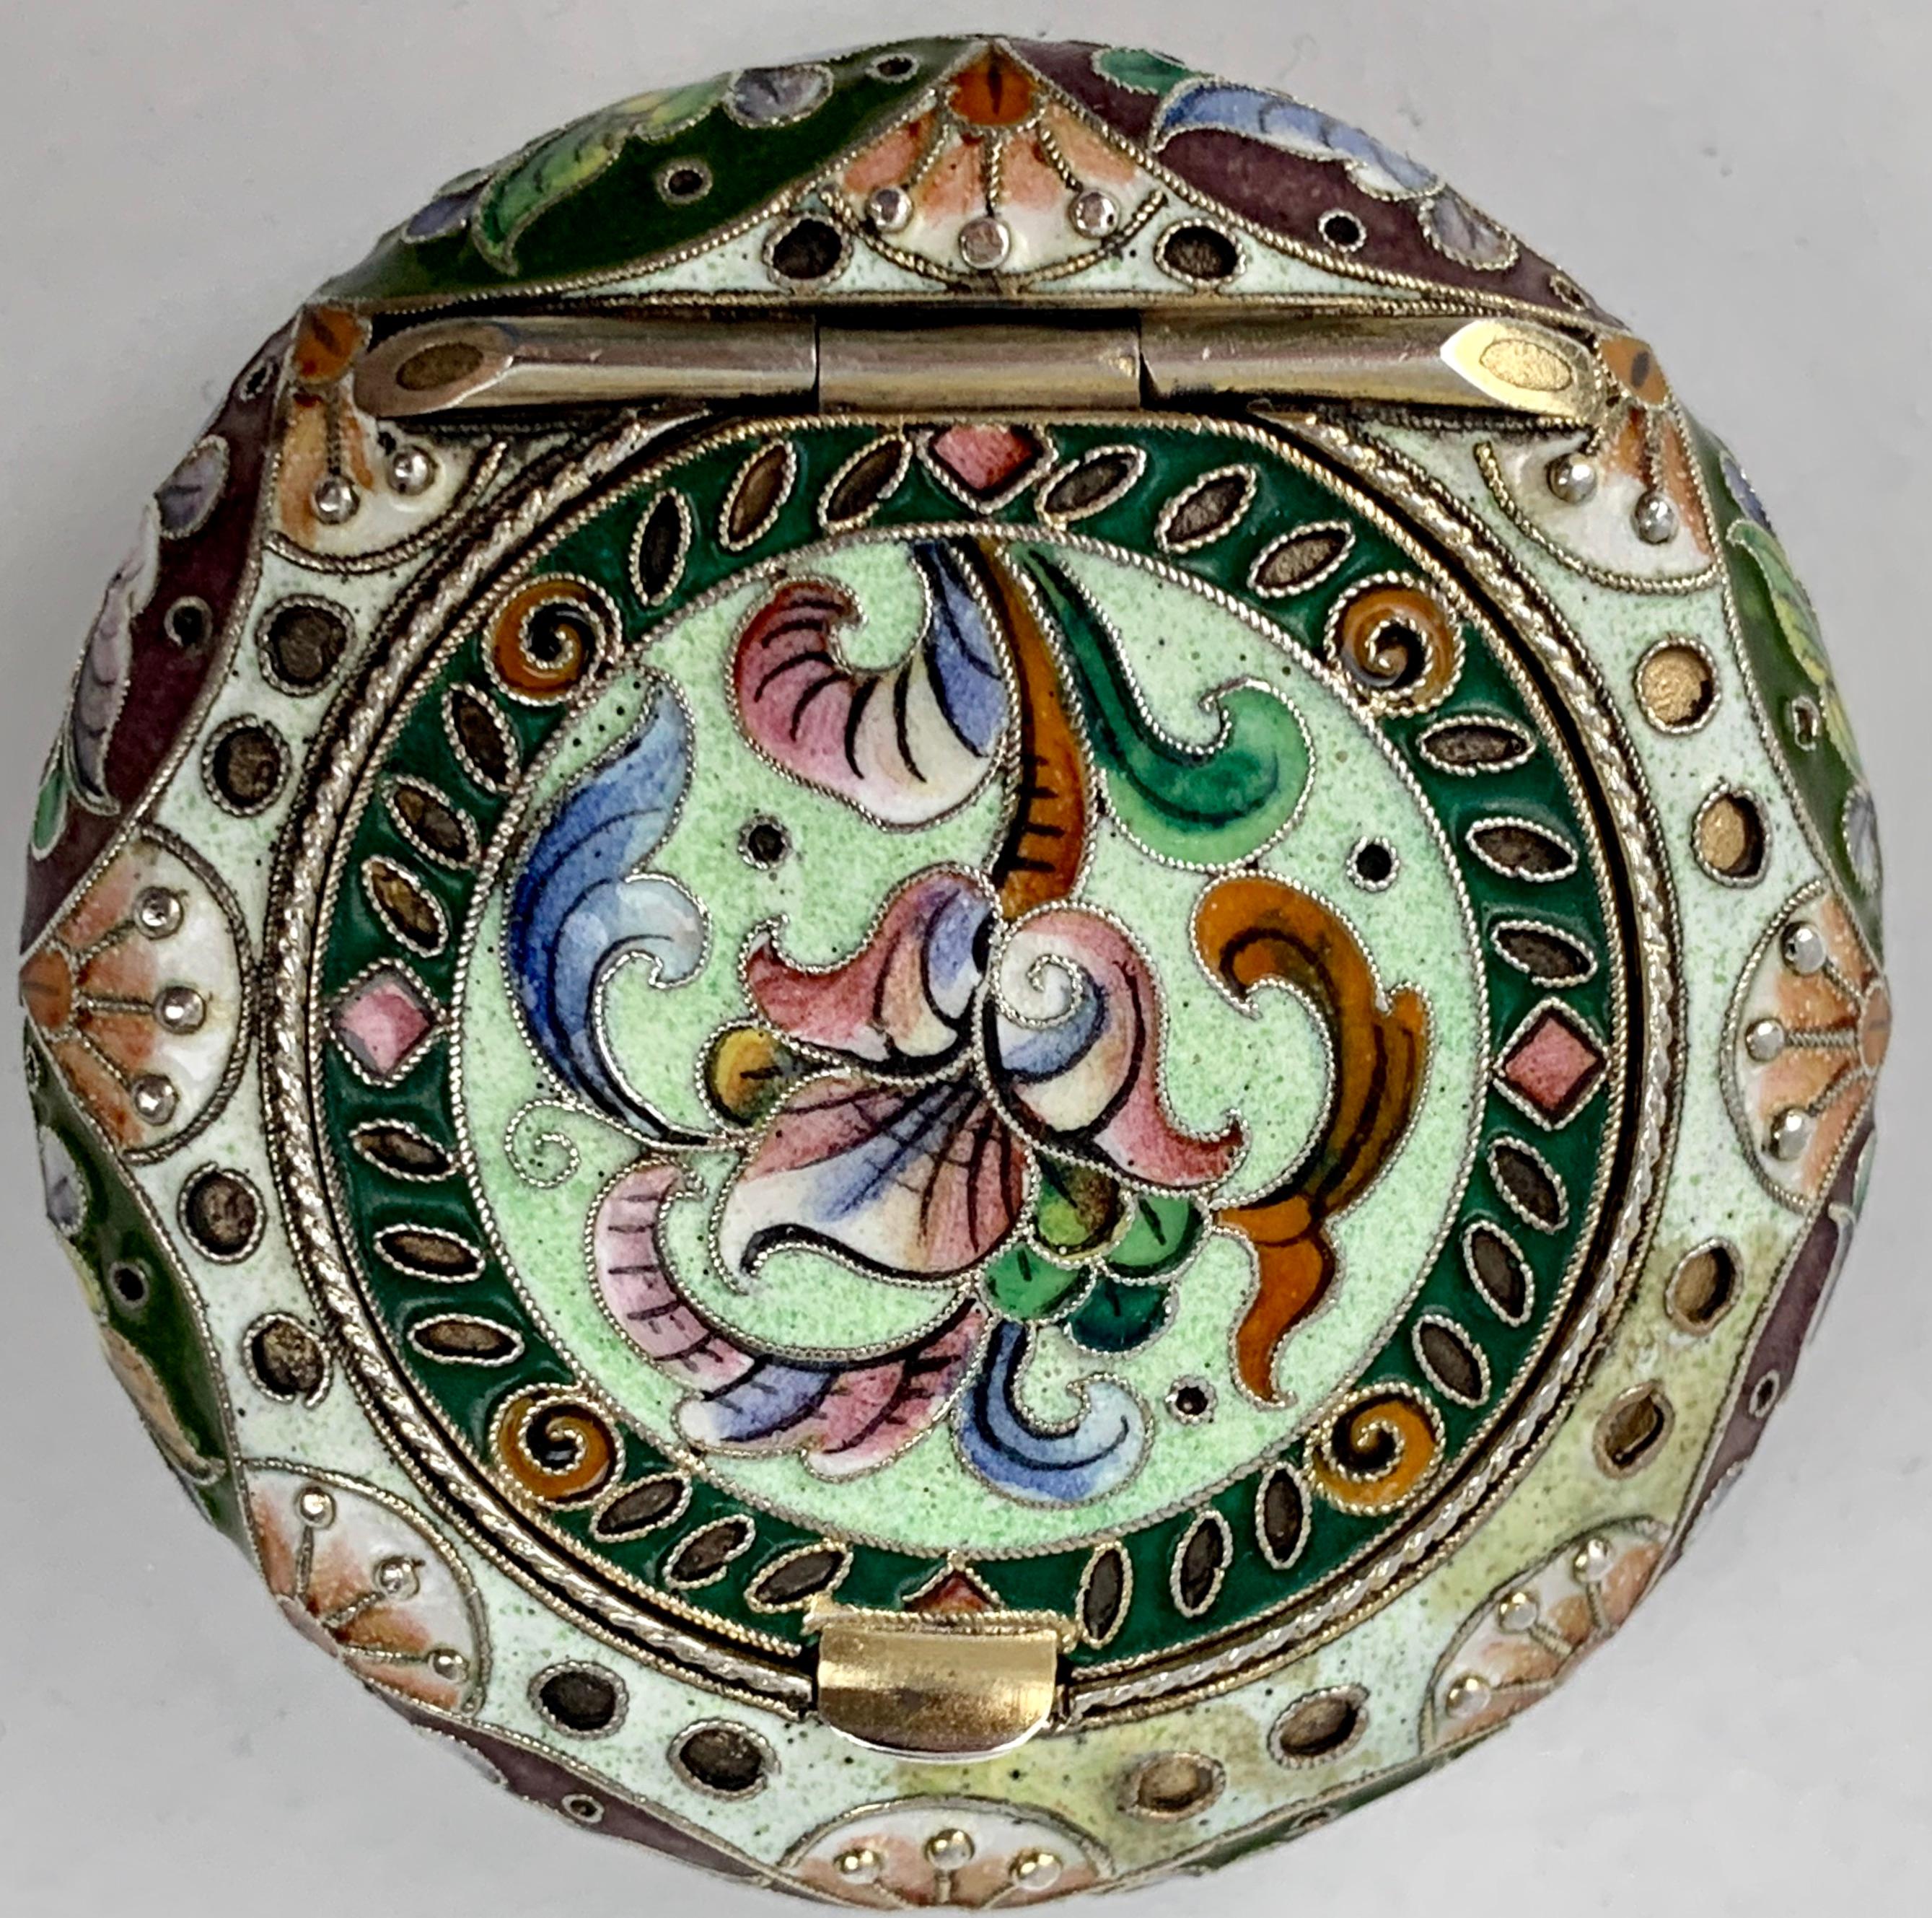 Imperial Russian polychromed enameled silver pill box. Hallmarked with Russian silver standard of 84 zolotnicks. The kokoshnik mark of a female with right facing profile indicates that it was made in Moscow after 1908. The silversmith appears to be